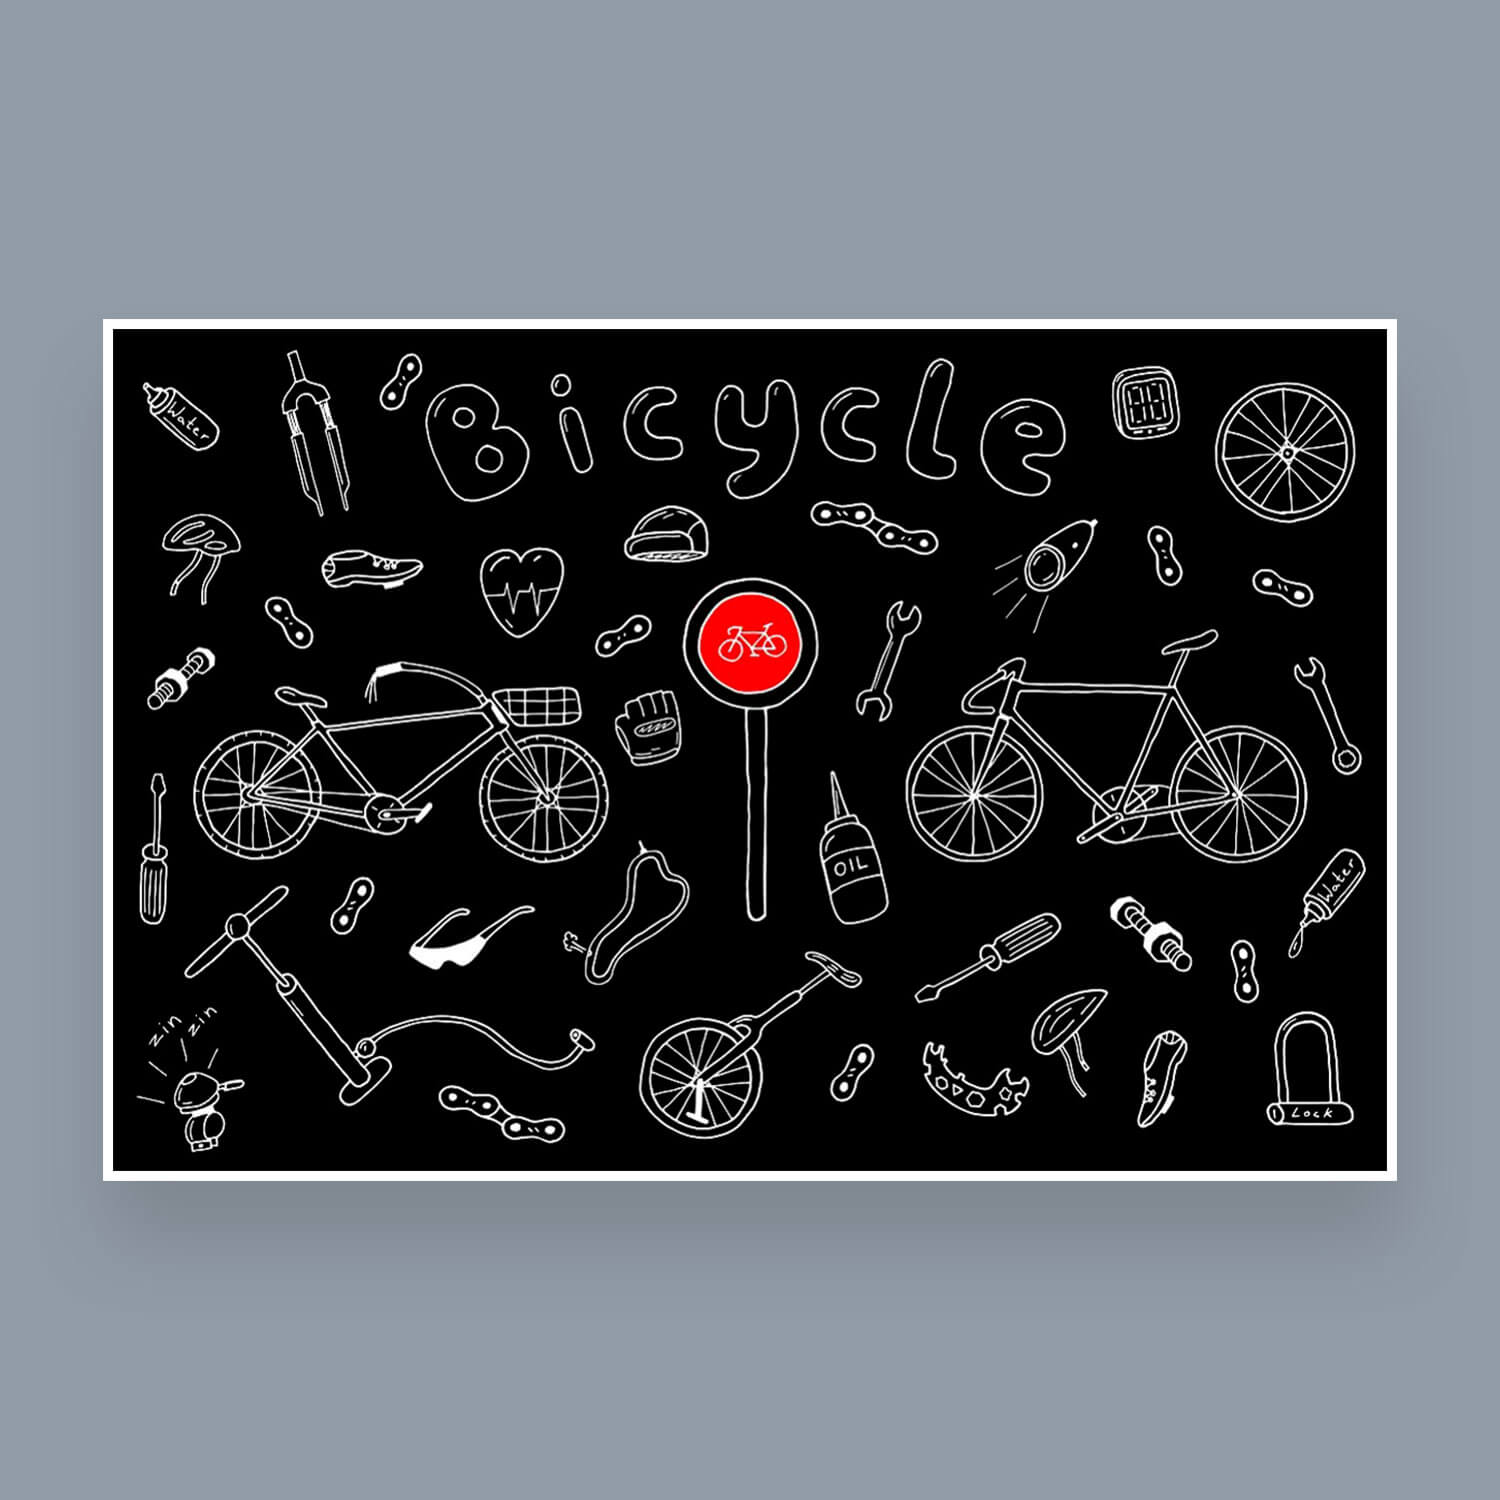 Drawn bicycles on a black background and a red sign Bicycle traffic is prohibited.